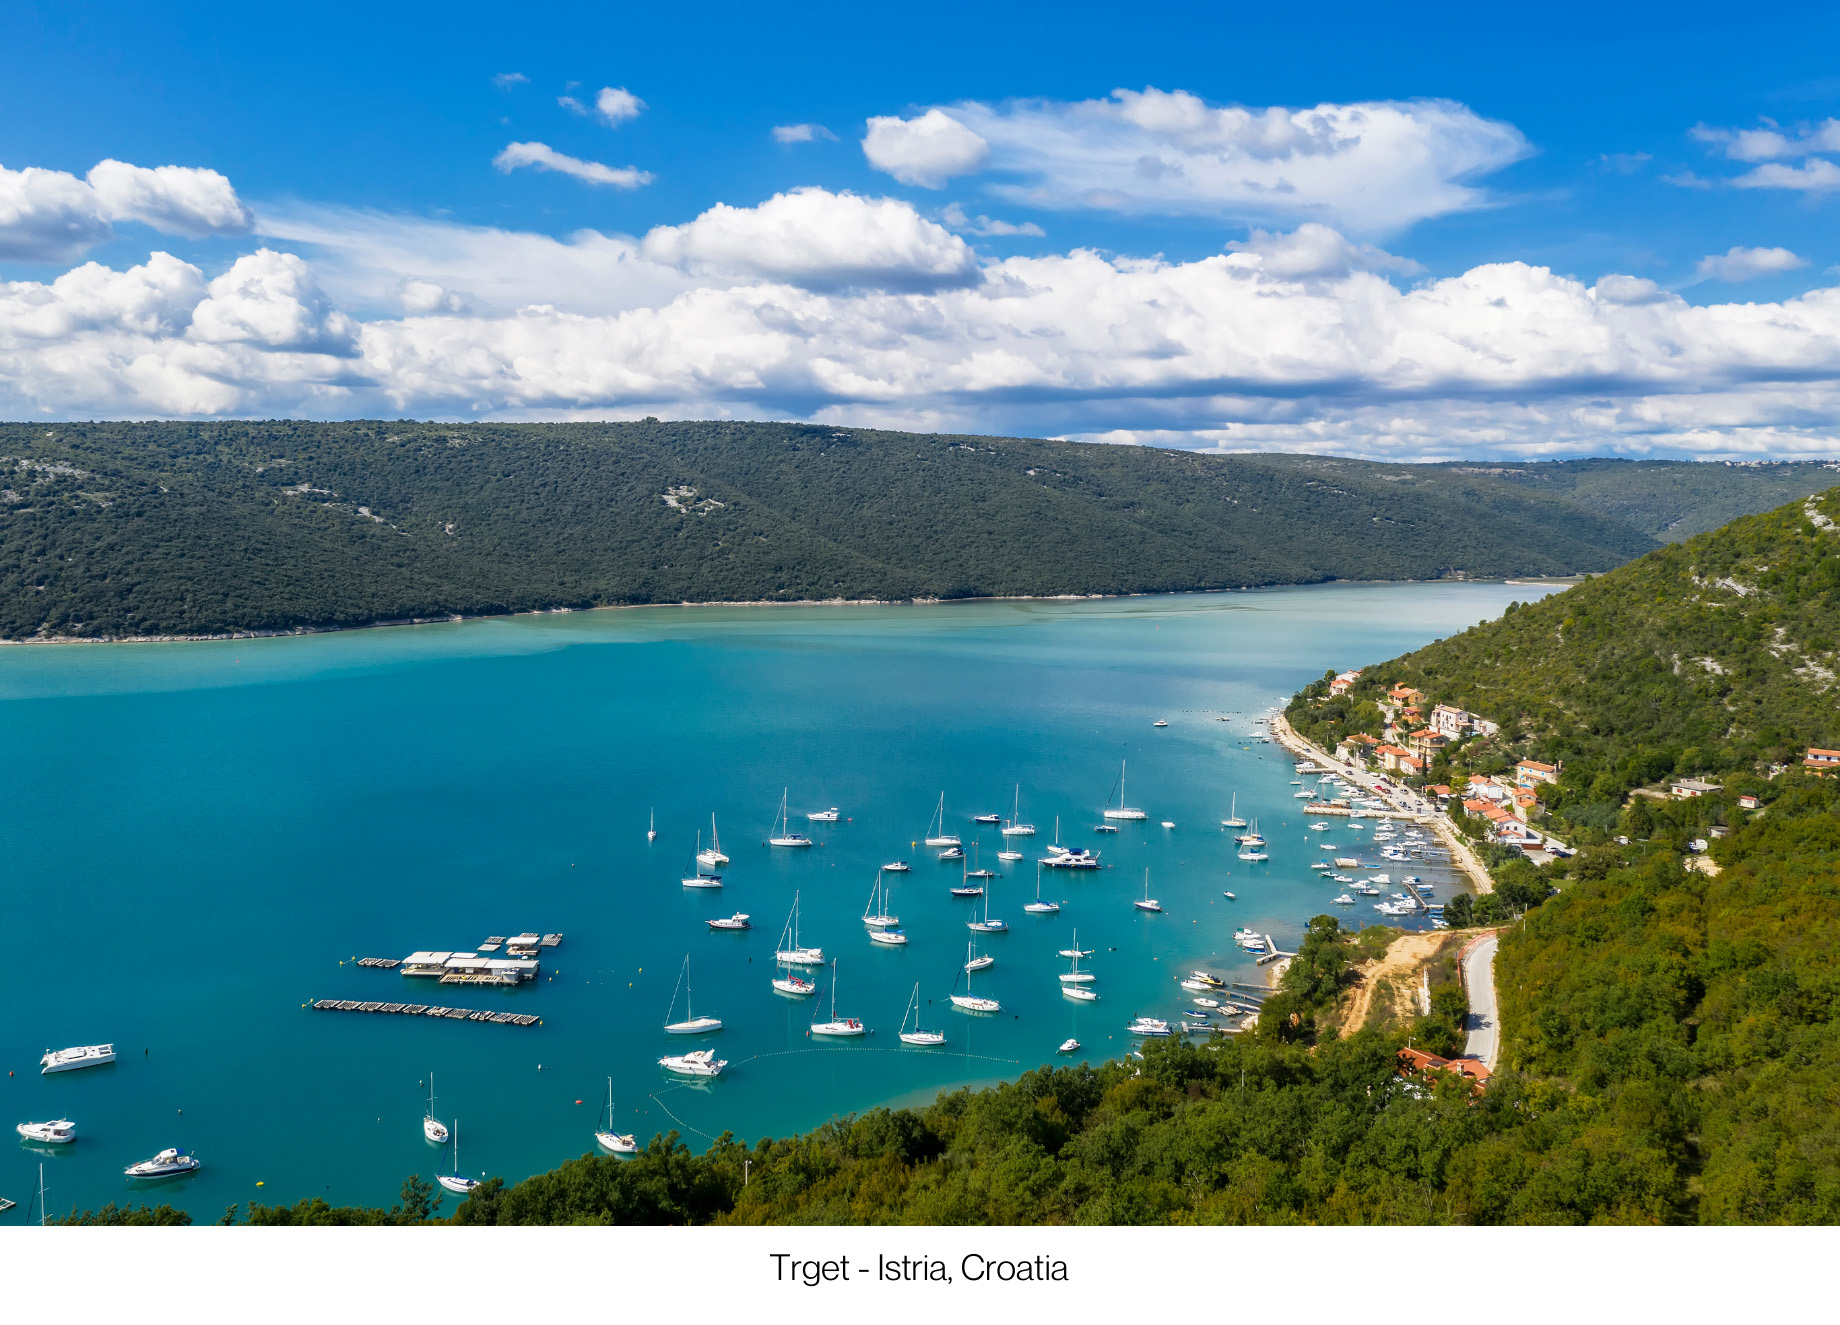 Explore Popular Croatian Destinations Without the Crowds by Yacht - Trget - Istria, Croatia